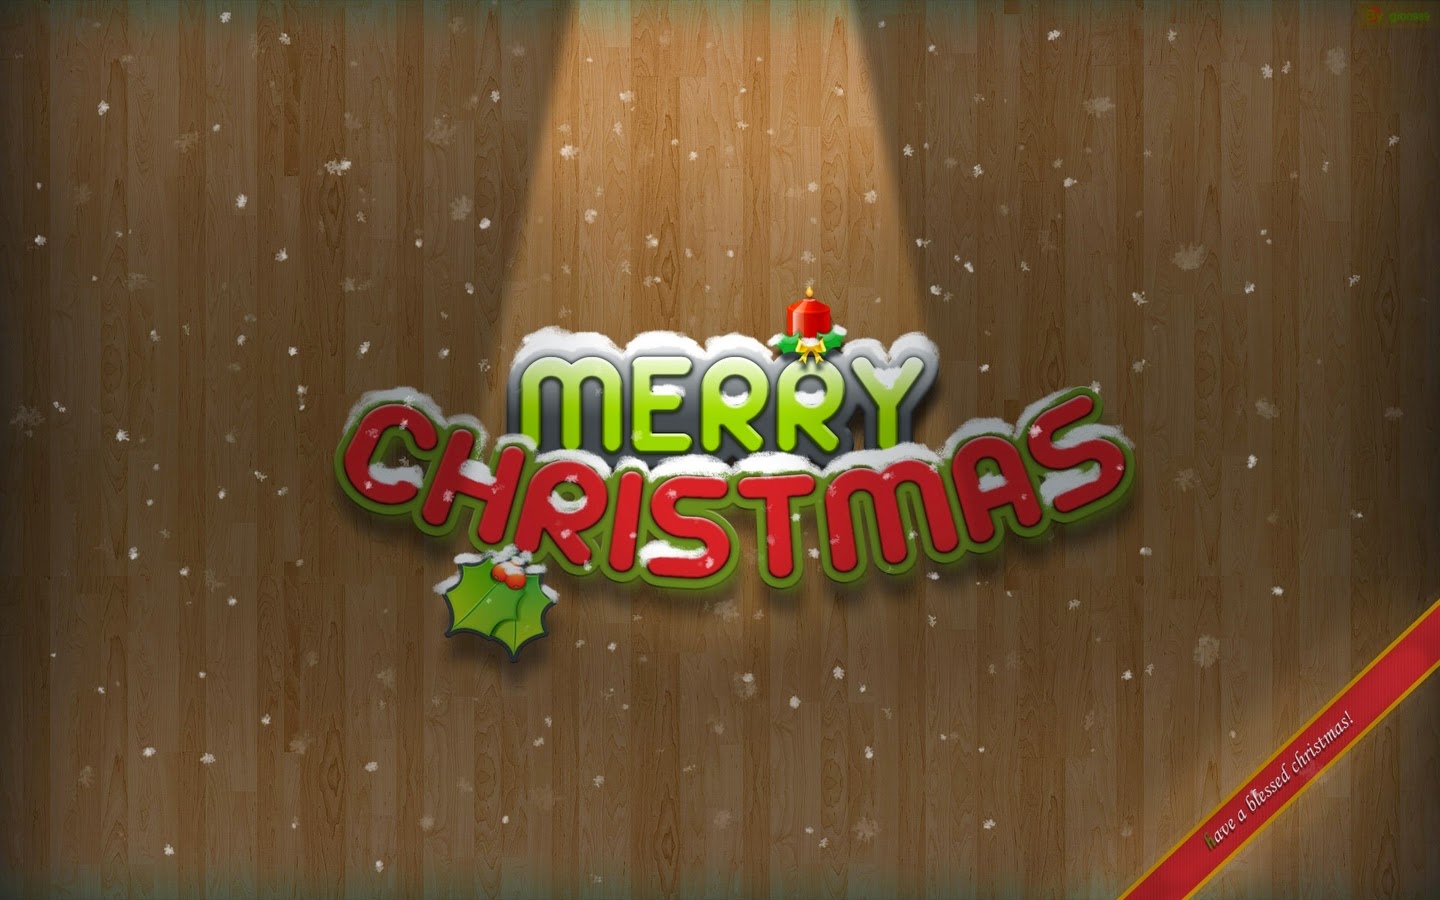 Cute Merry Christmas background Full HD 1080p Wallpapers 1440x900